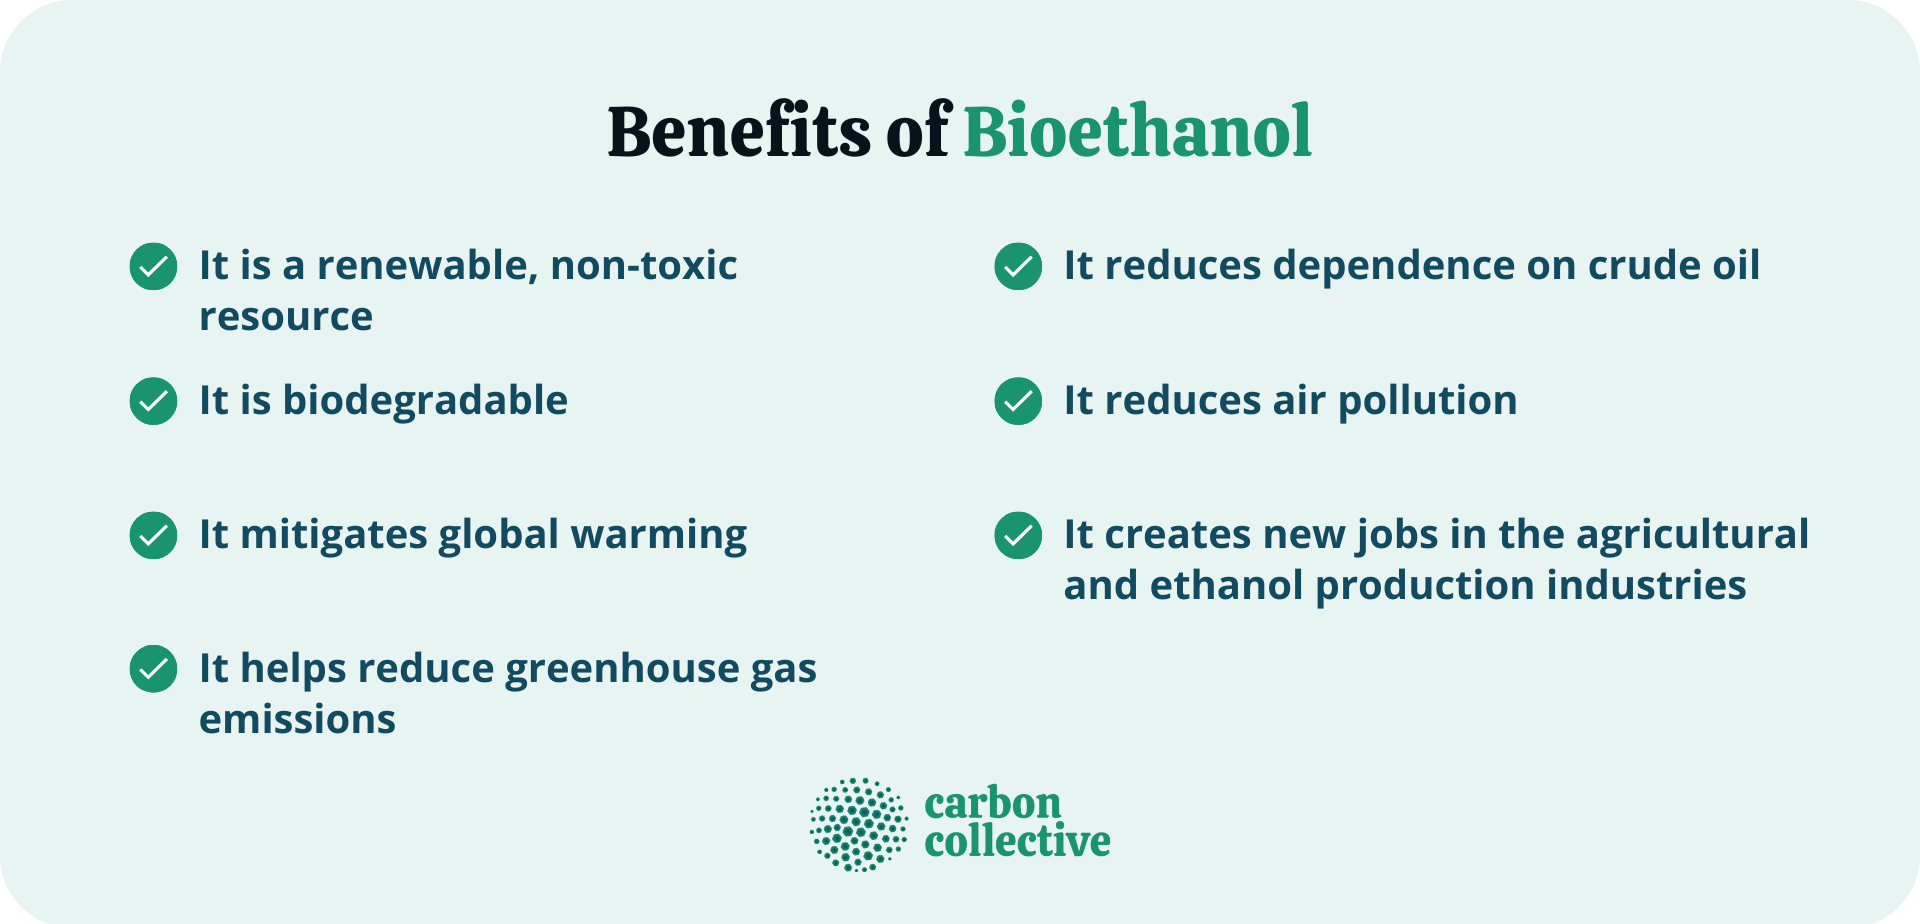 Pros and cons of bioethanol